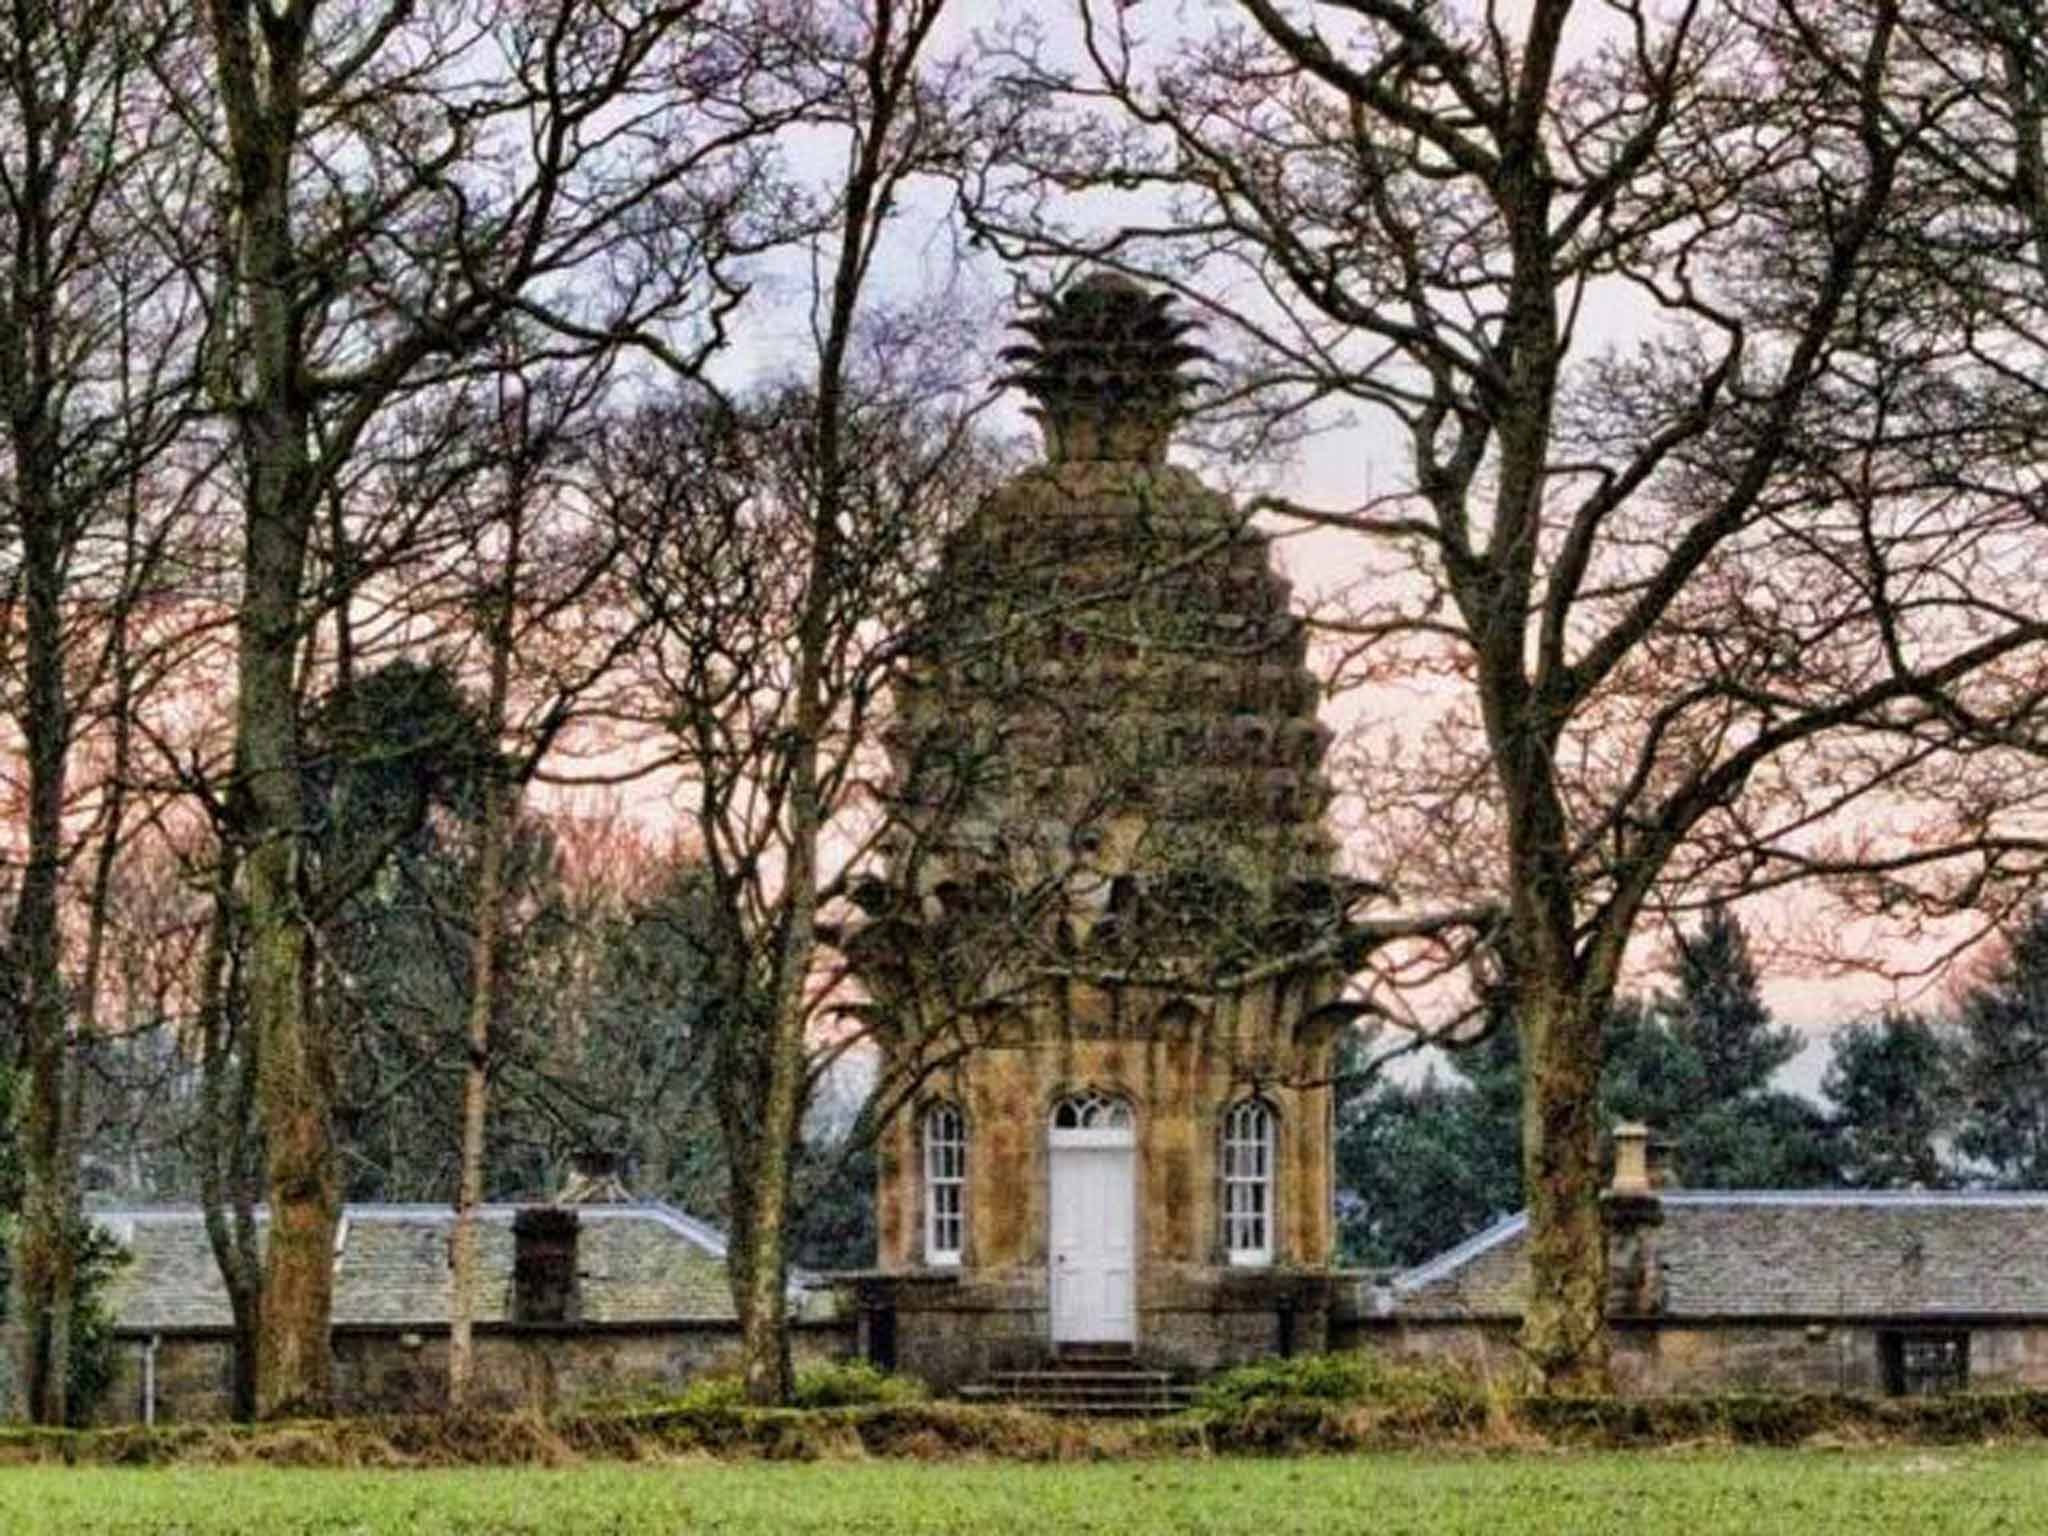 The Pineapple is an 18th-century summer house in Dunmore, Scotland